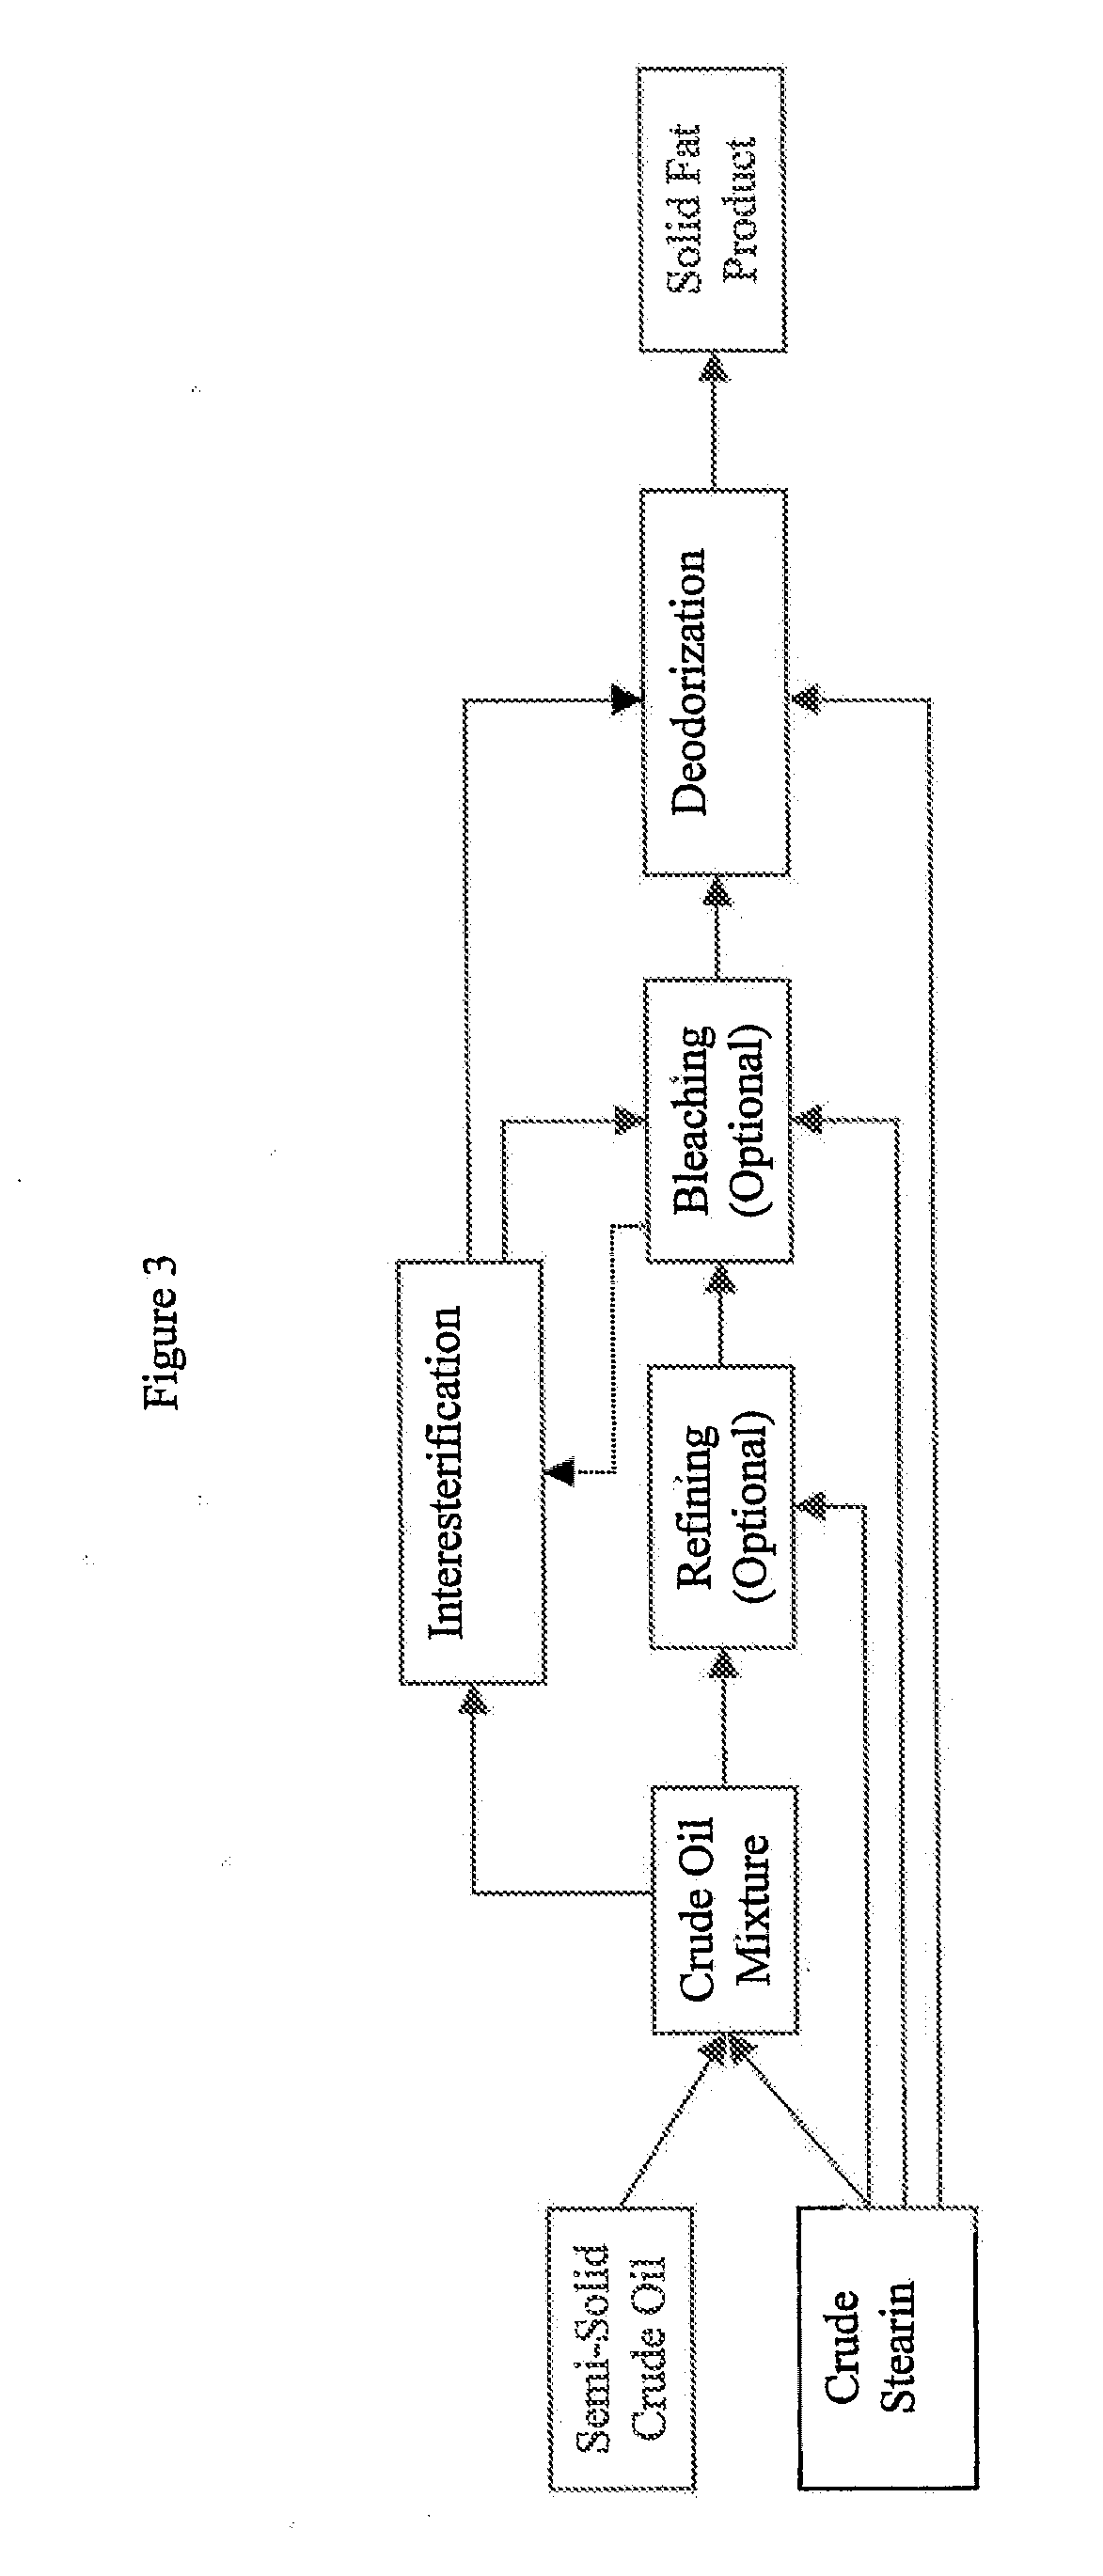 Polyunsaturated fatty acid-containing solid fat compositions and uses and production thereof